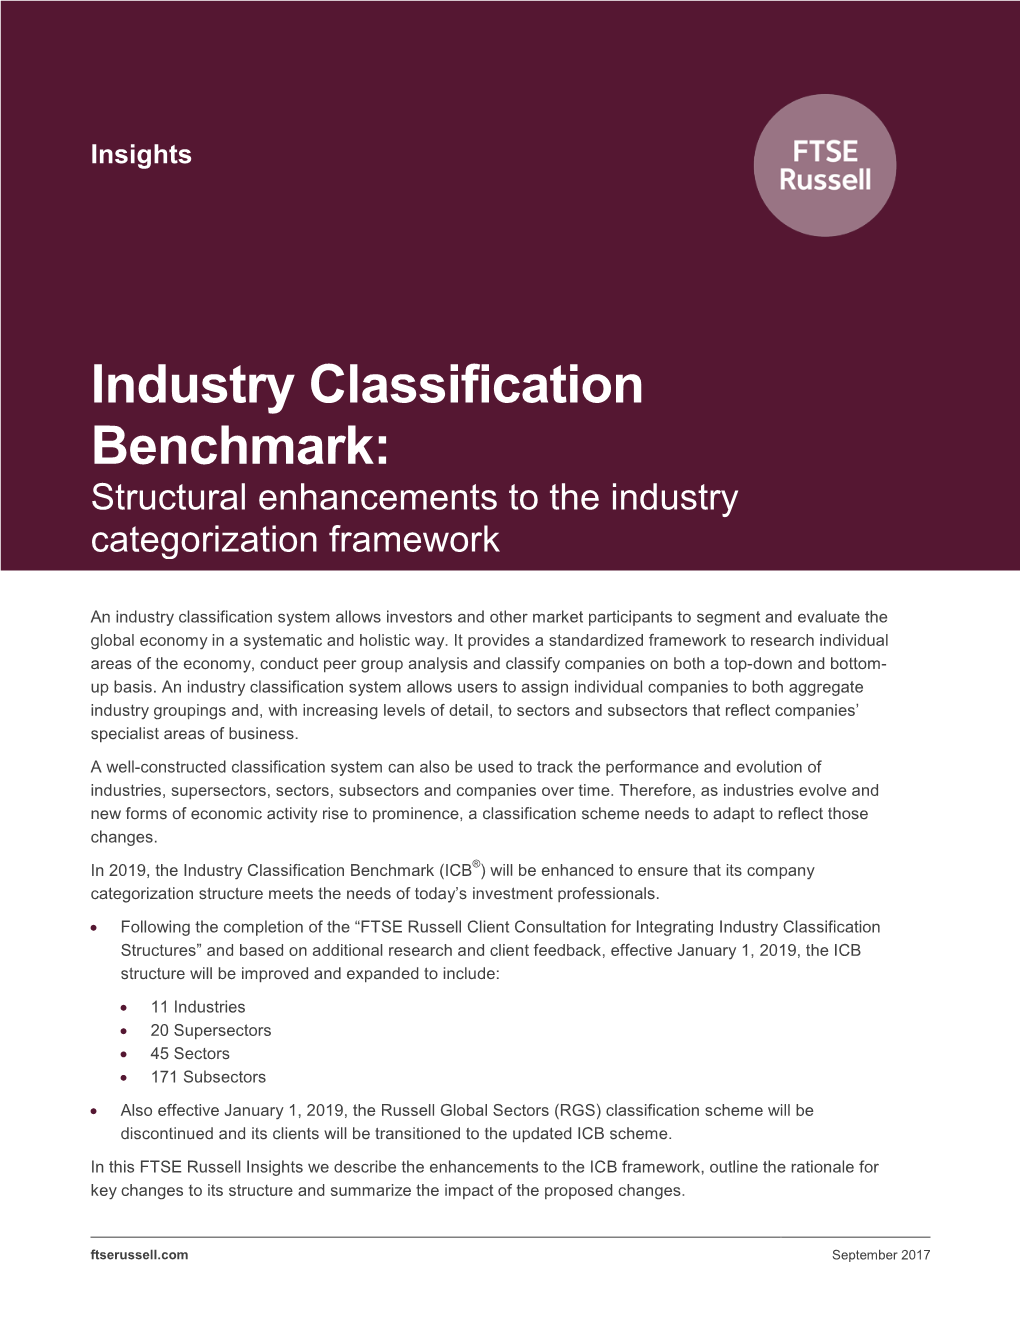 Industry Classification Benchmark: Structural Enhancements to the Industry Categorization Framework